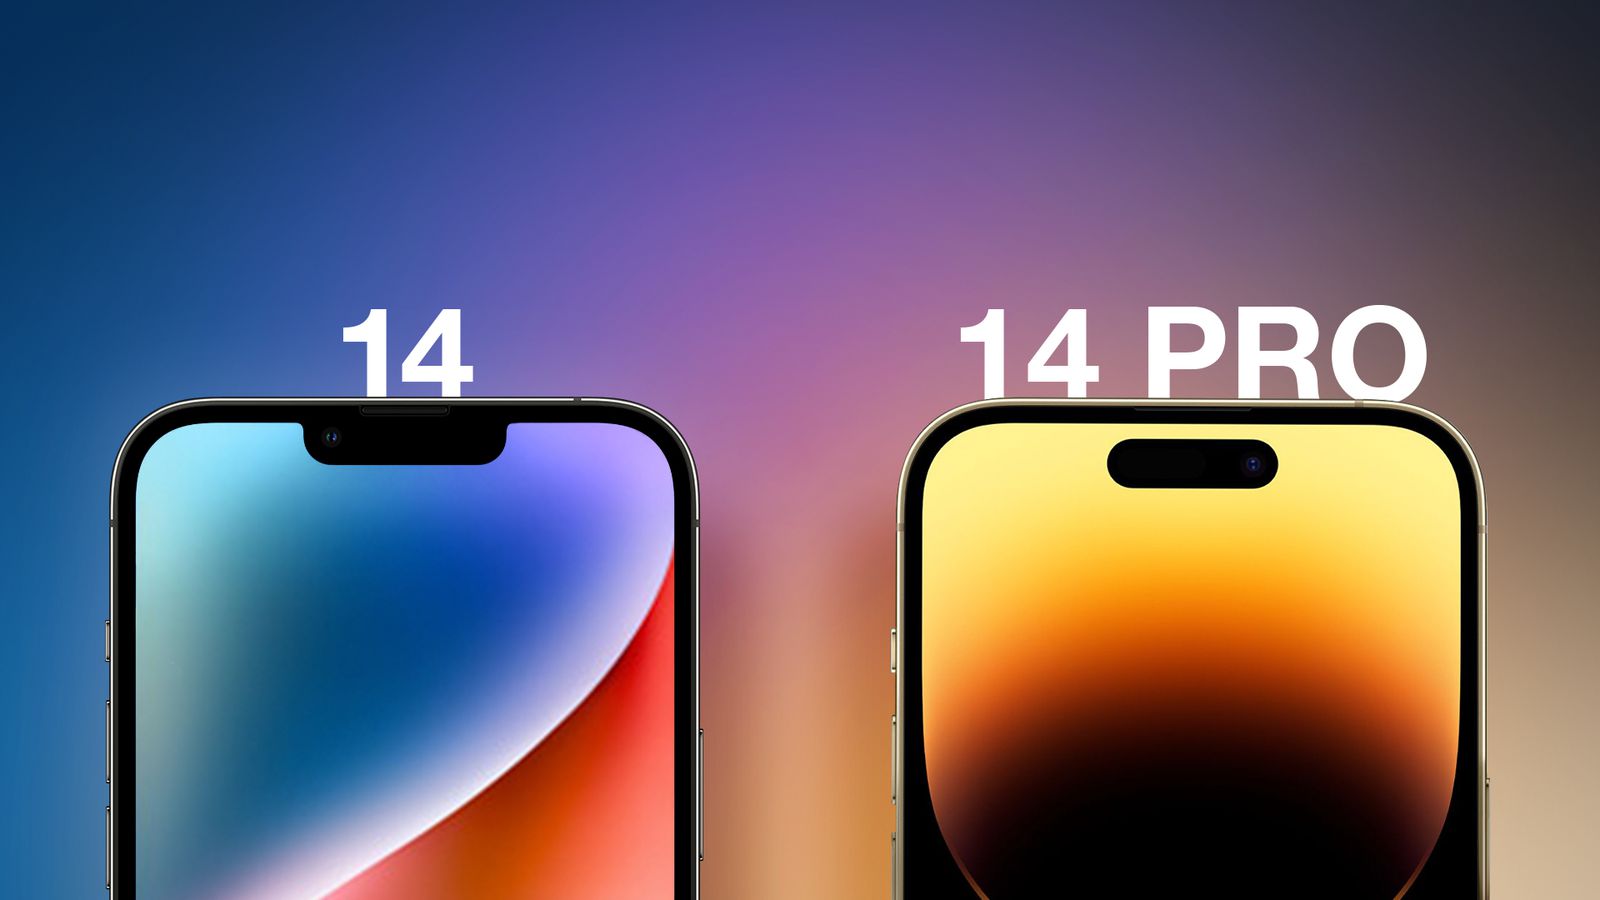 iPhone 14 vs iPhone 14 Pro features - 9to5Mac